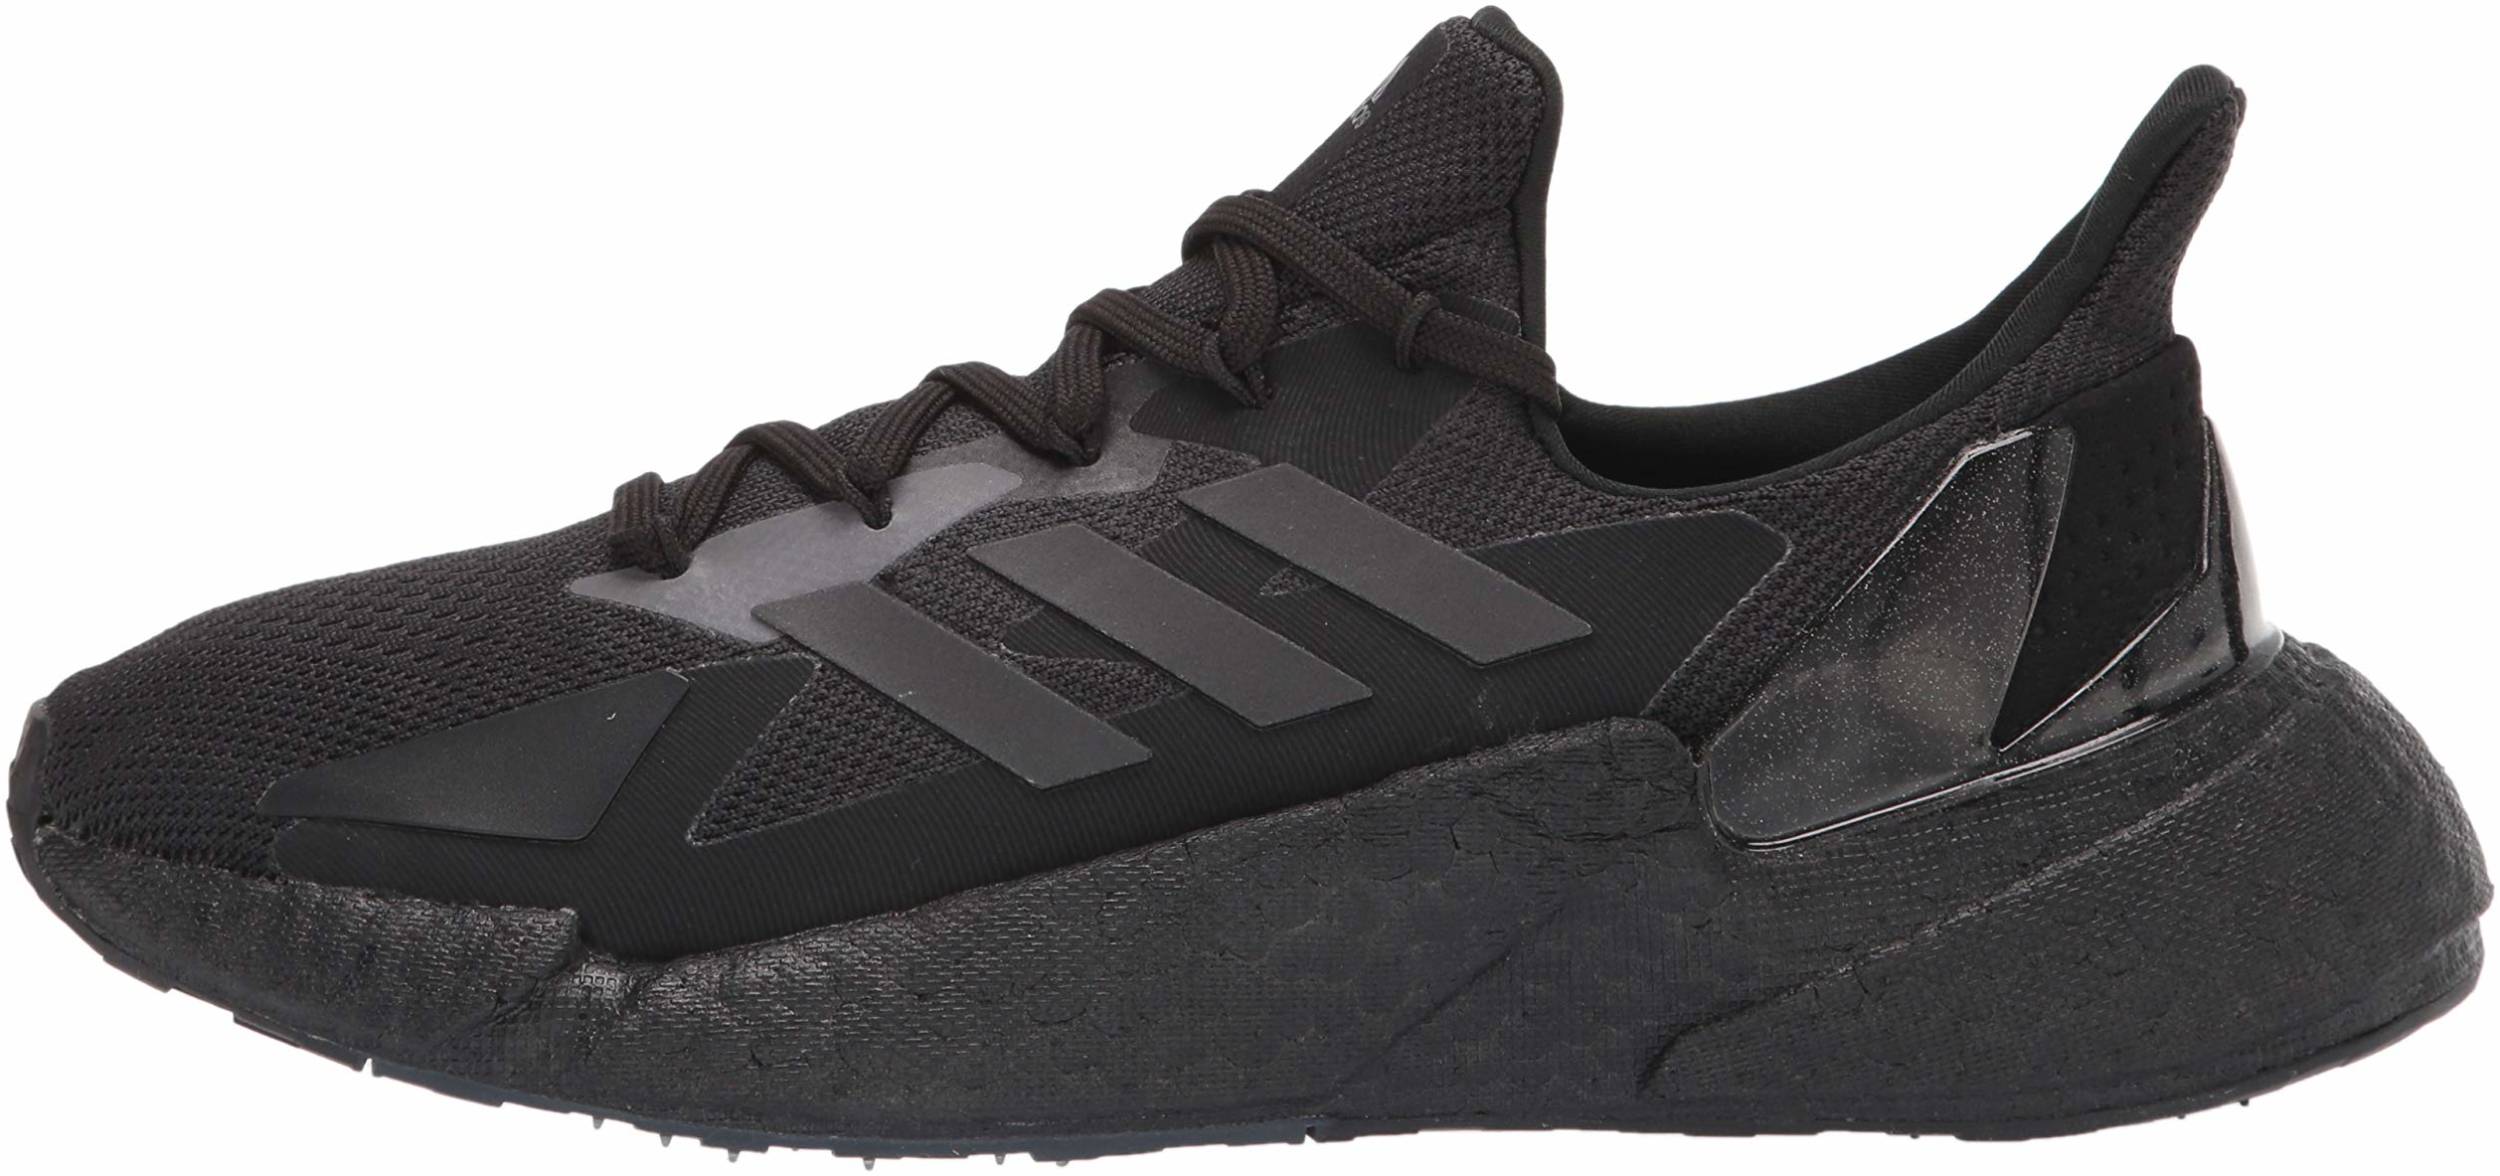 Buy adidas shoes x9000l4> OFF-67%